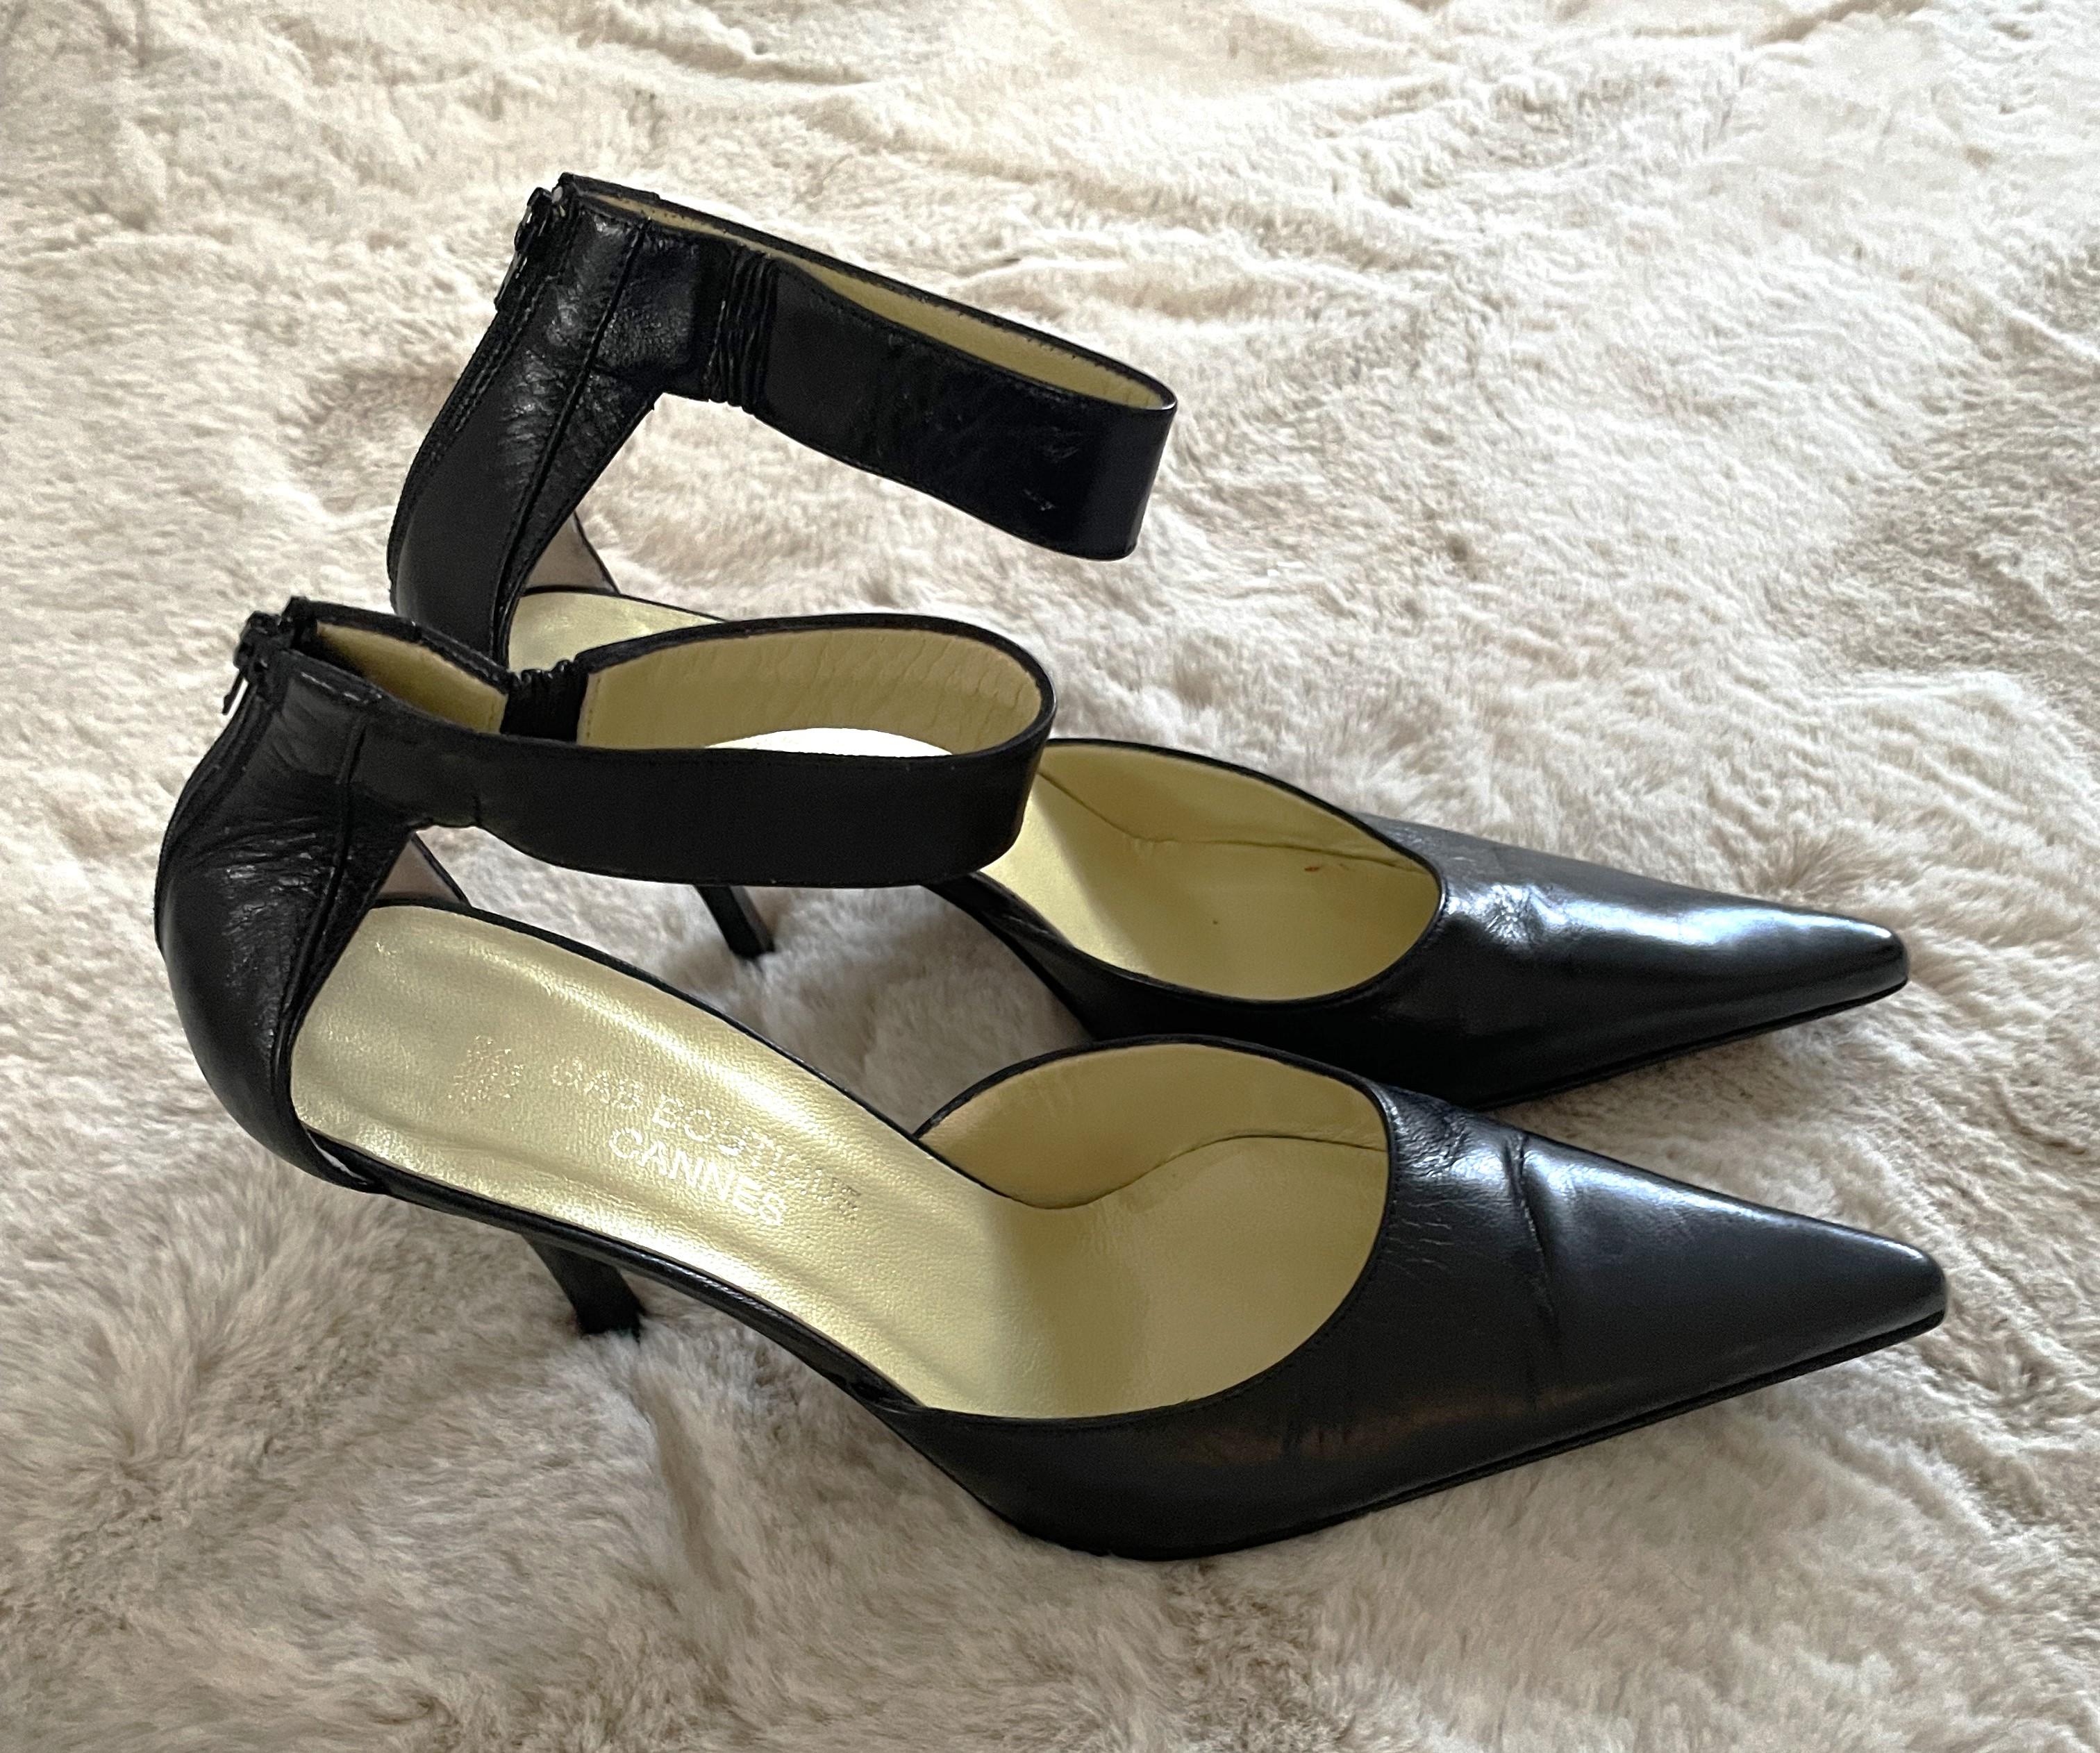 Steel the show with these stunning rare high heels from the designer Sandro Vicari for Gab Boutique Cannes. Ankle strap with zipper at the back. One of a kind item. Made in Venice Italy. 

Sandro Vicari is not just the name of a company on the